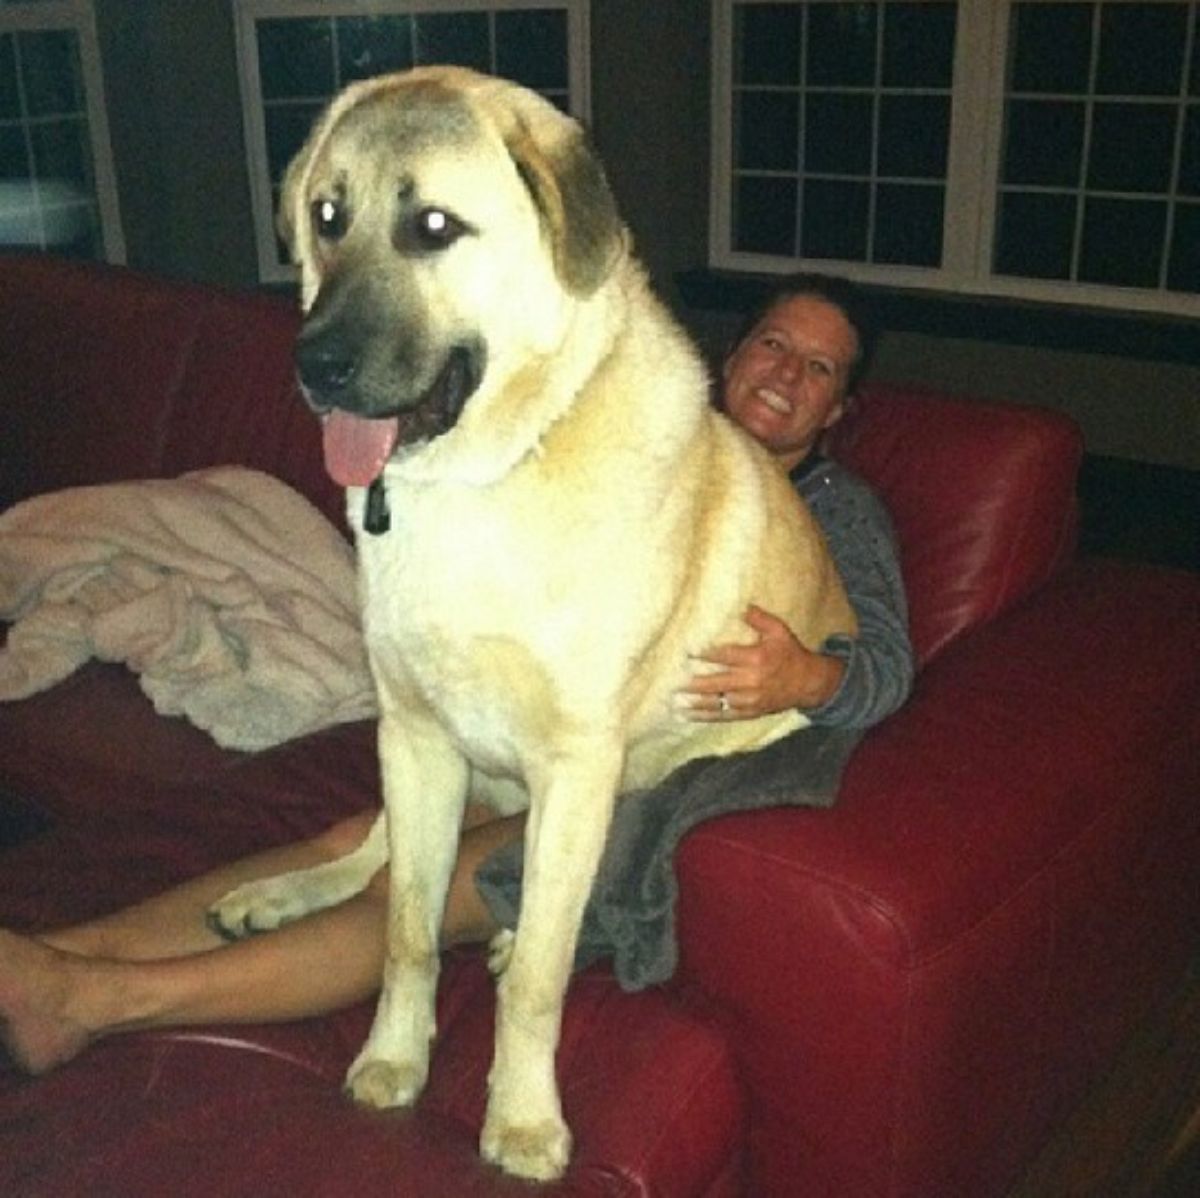 large brown dog sitting on a person's lap who is sitting on a red sofa